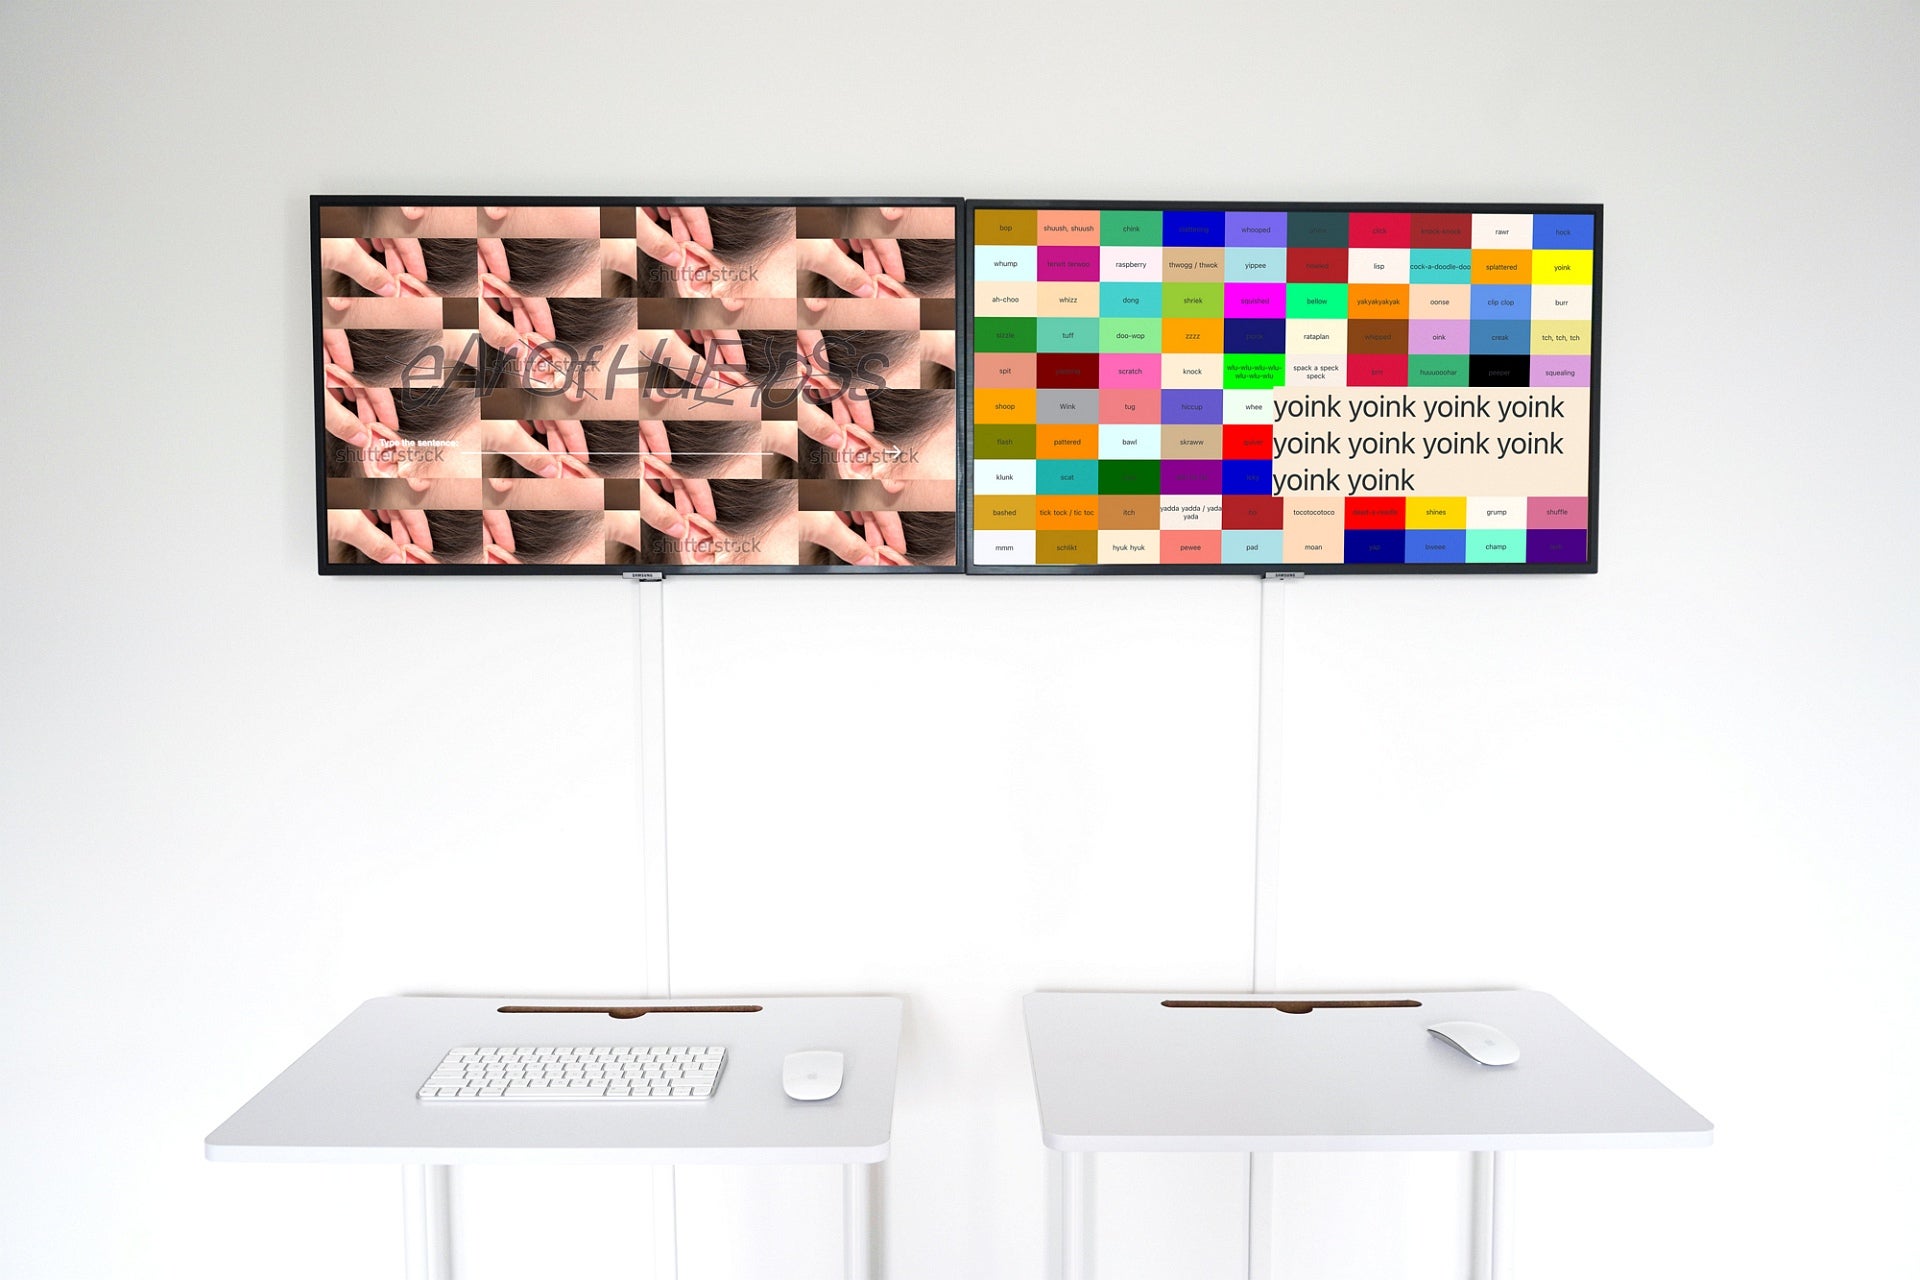 Artwork of two monitors on a wall above two white tables with keyboard and mouse. The monitor on the left displays a grid of multiple images of an ear being pulled up into a point.  The monitor on the right displays a grid of multicoloured square with a word in each square.  A larger word, "yoink", repeats on top of this grid.